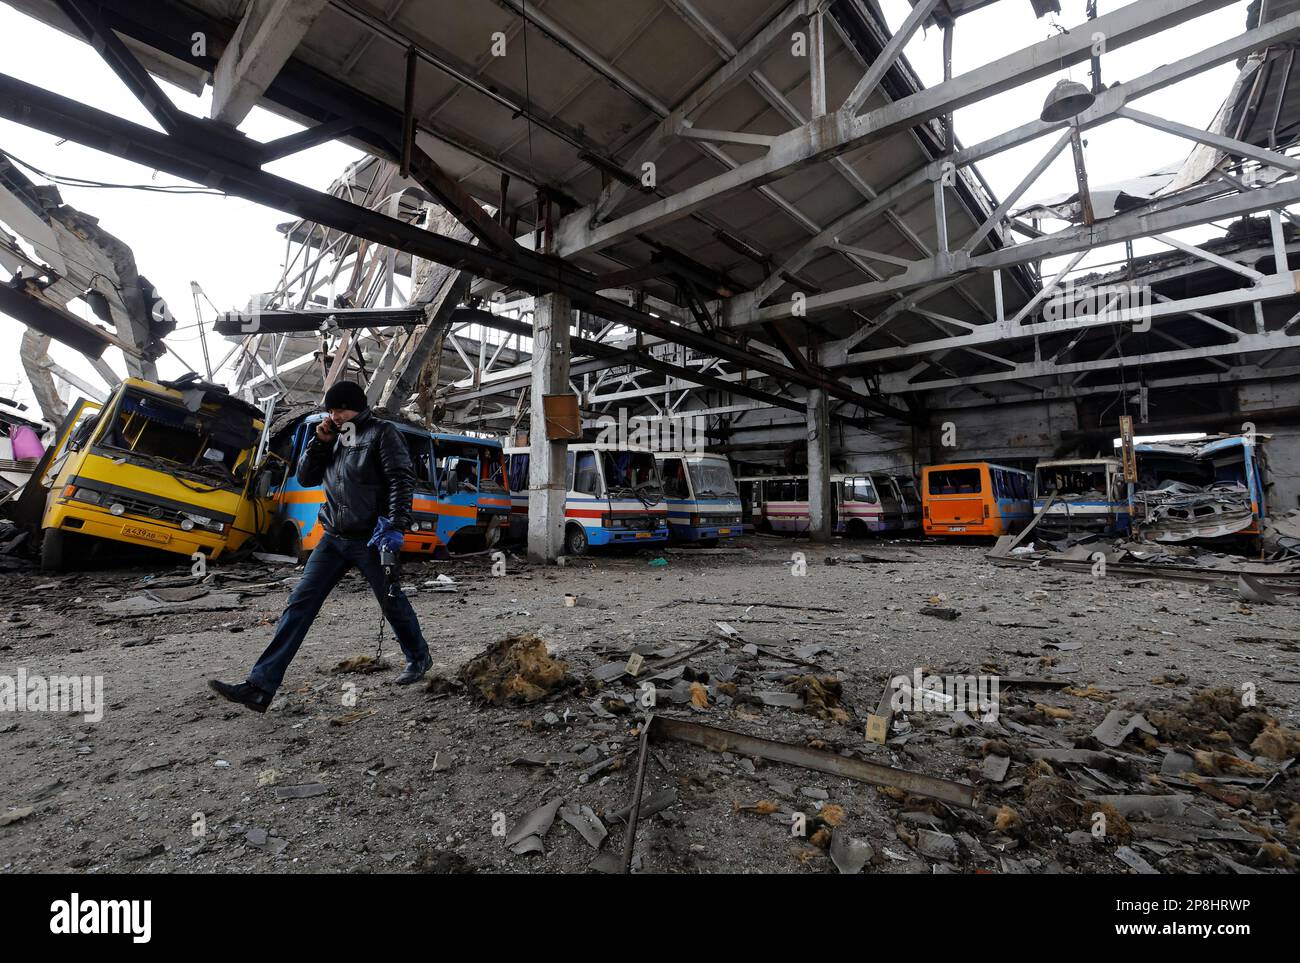 A man walks through the bus depot damaged by recent shelling in the course of Russia-Ukraine conflict, in the town of Volnovakha in the Donetsk region, Russian-controlled Ukraine, March 9, 2023. REUTERS/Alexander Ermochenko Stock Photo